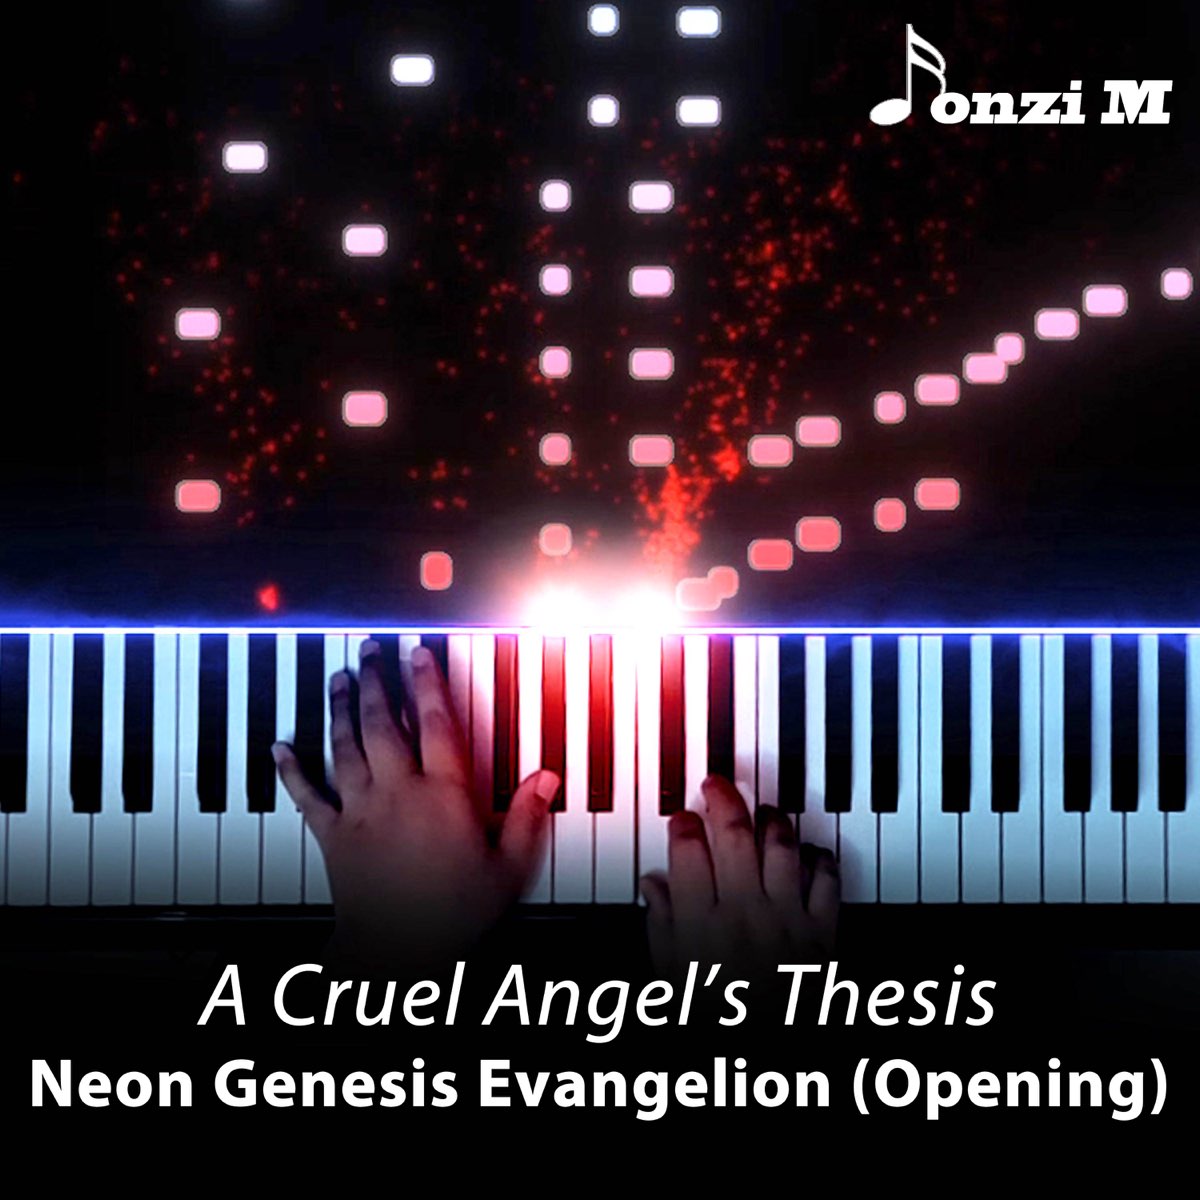 A Cruel Angel's Thesis (From "Neon Genesis Evangelion") [Opening] - Single  by Fonzi M on Apple Music